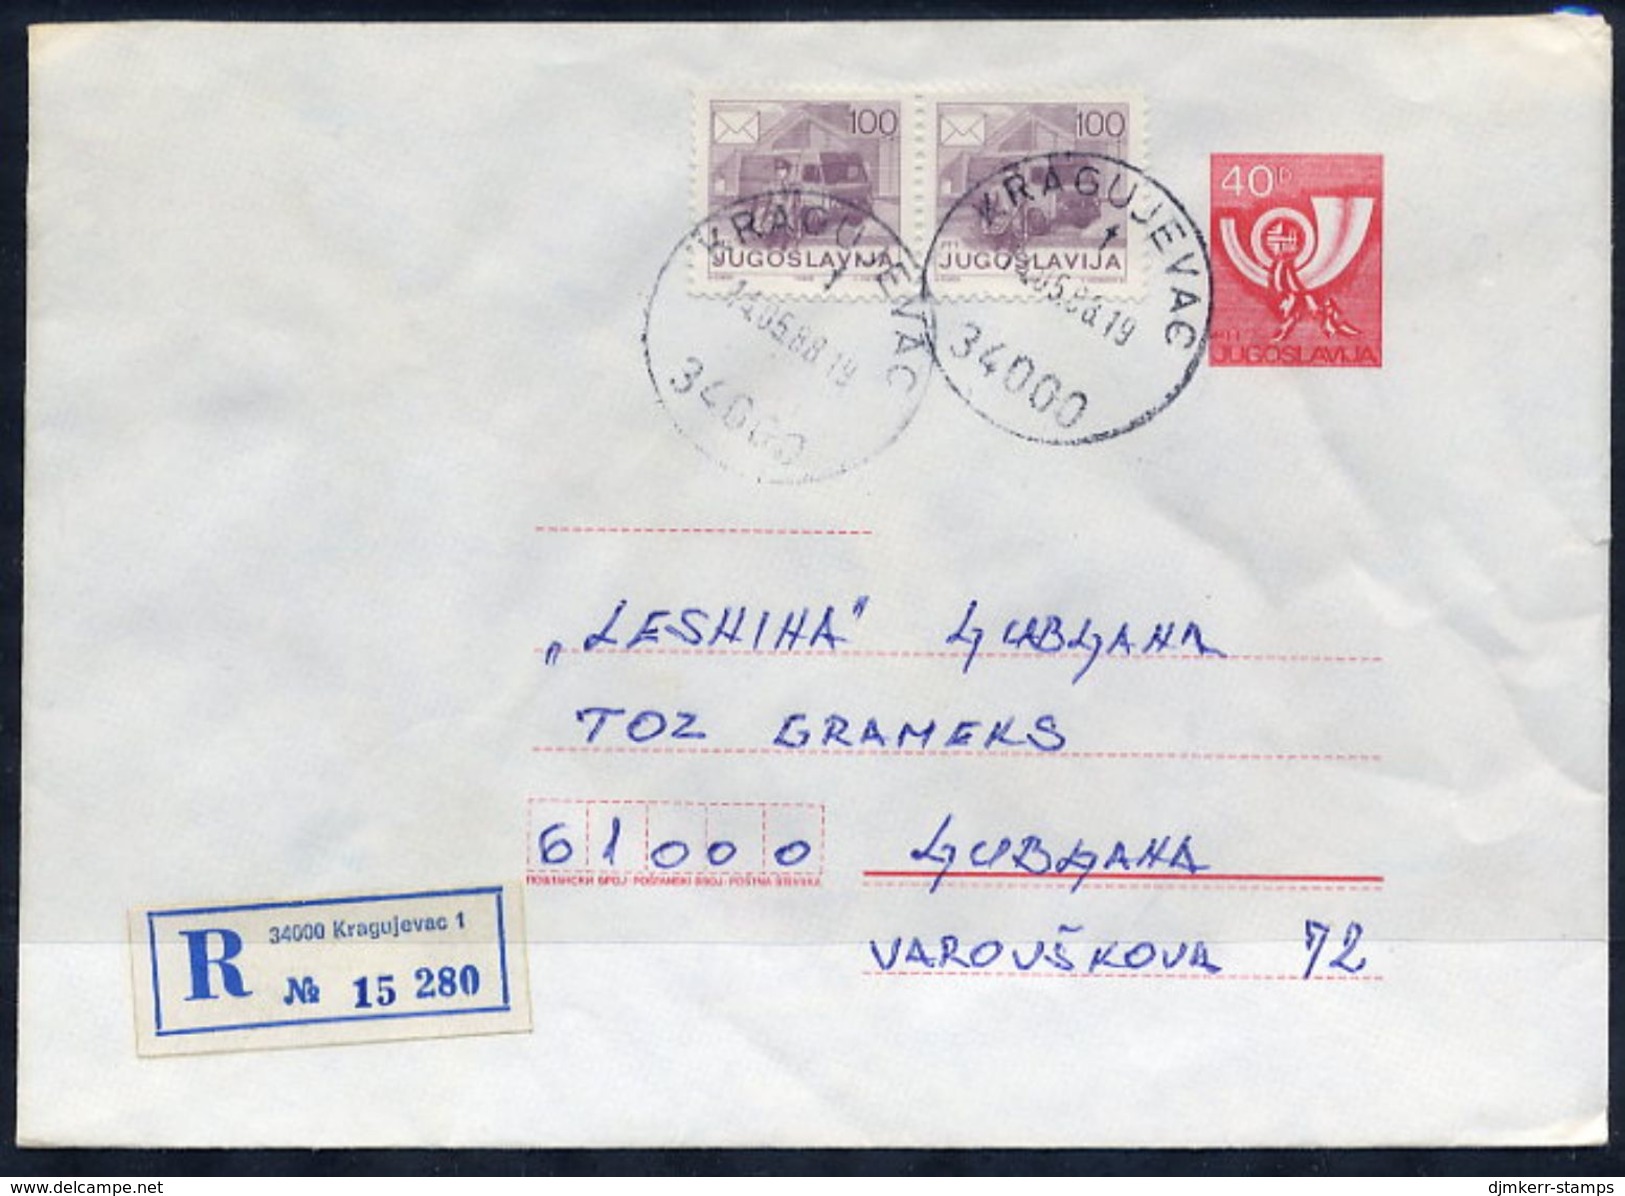 YUGOSLAVIA 1986 Posthorn 40 D.stationery Envelope Format B With  Used With Additional Franking.  Michel U76B - Postal Stationery